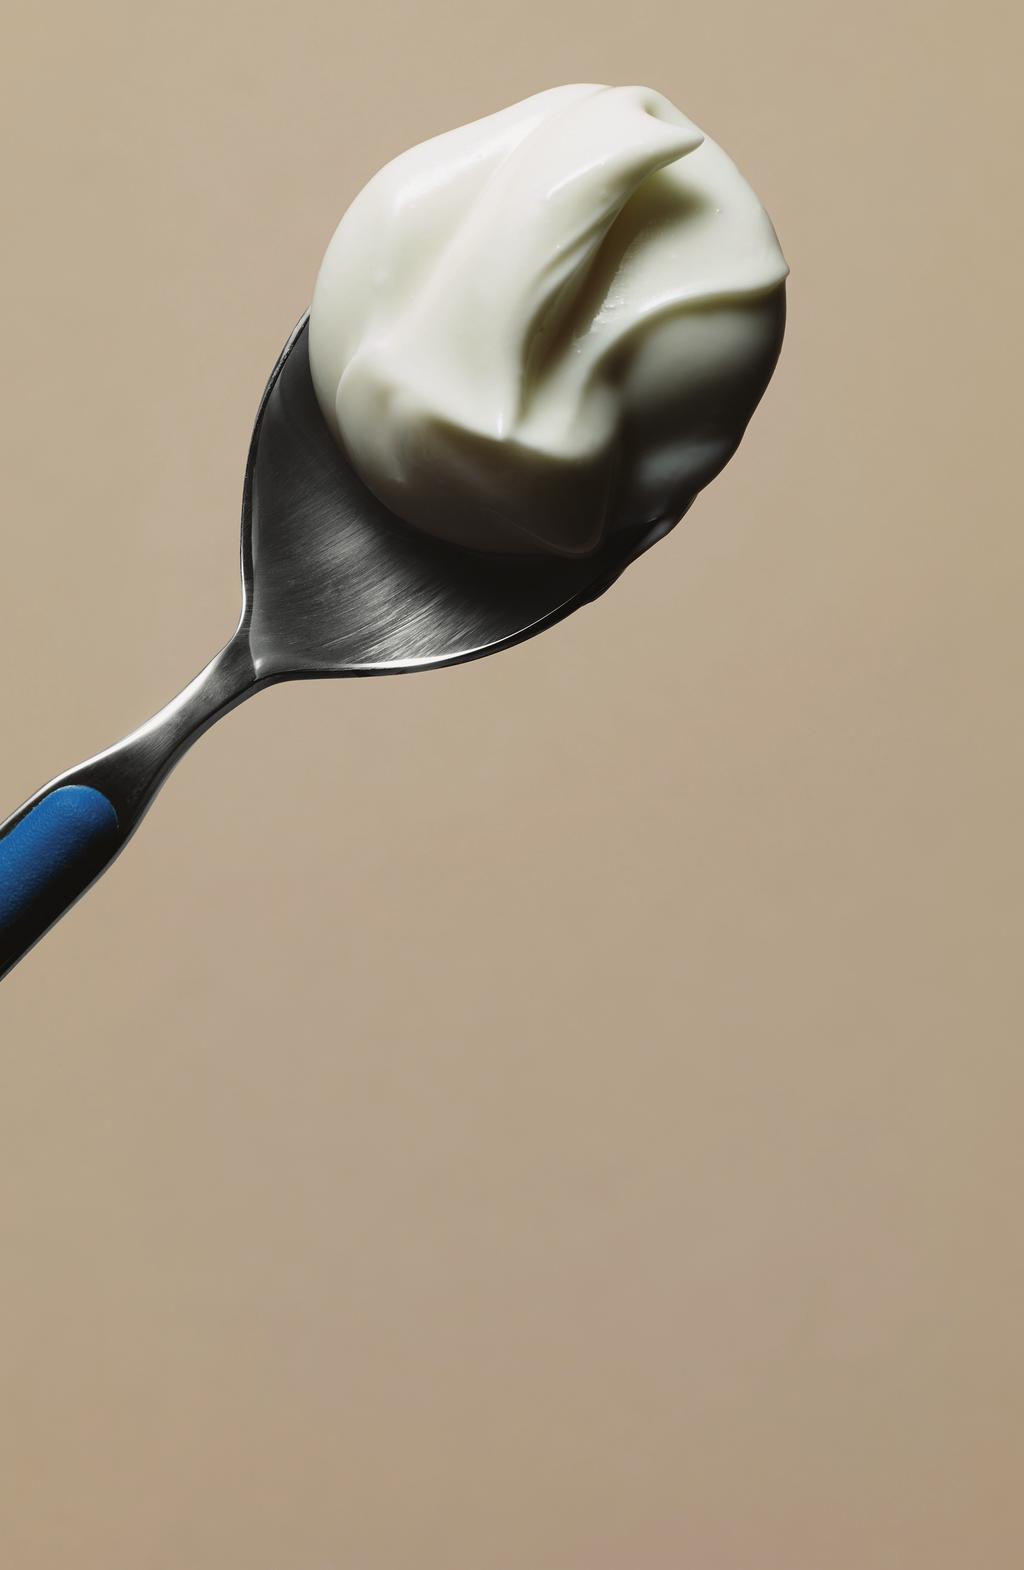 The Truth of the Matter HOW WELL DO YOU KNOW YOGURT? What you don t know might surprise you. FACT: If you re lactose intolerant, you can most likely consume yogurt and have few to no symptoms.